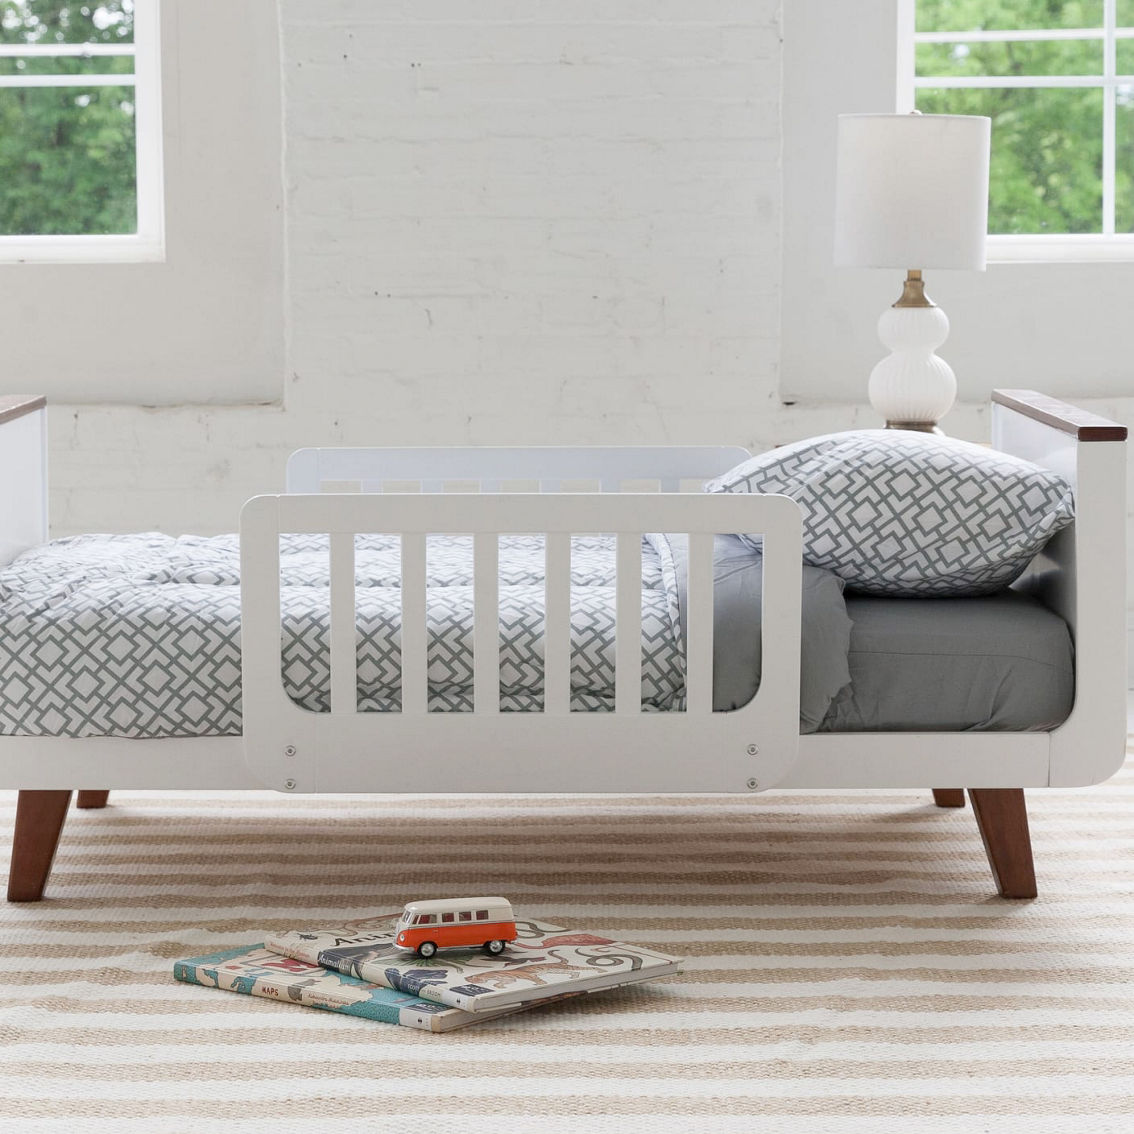 Little Partners MOD Toddler Bed - Image 3 of 5